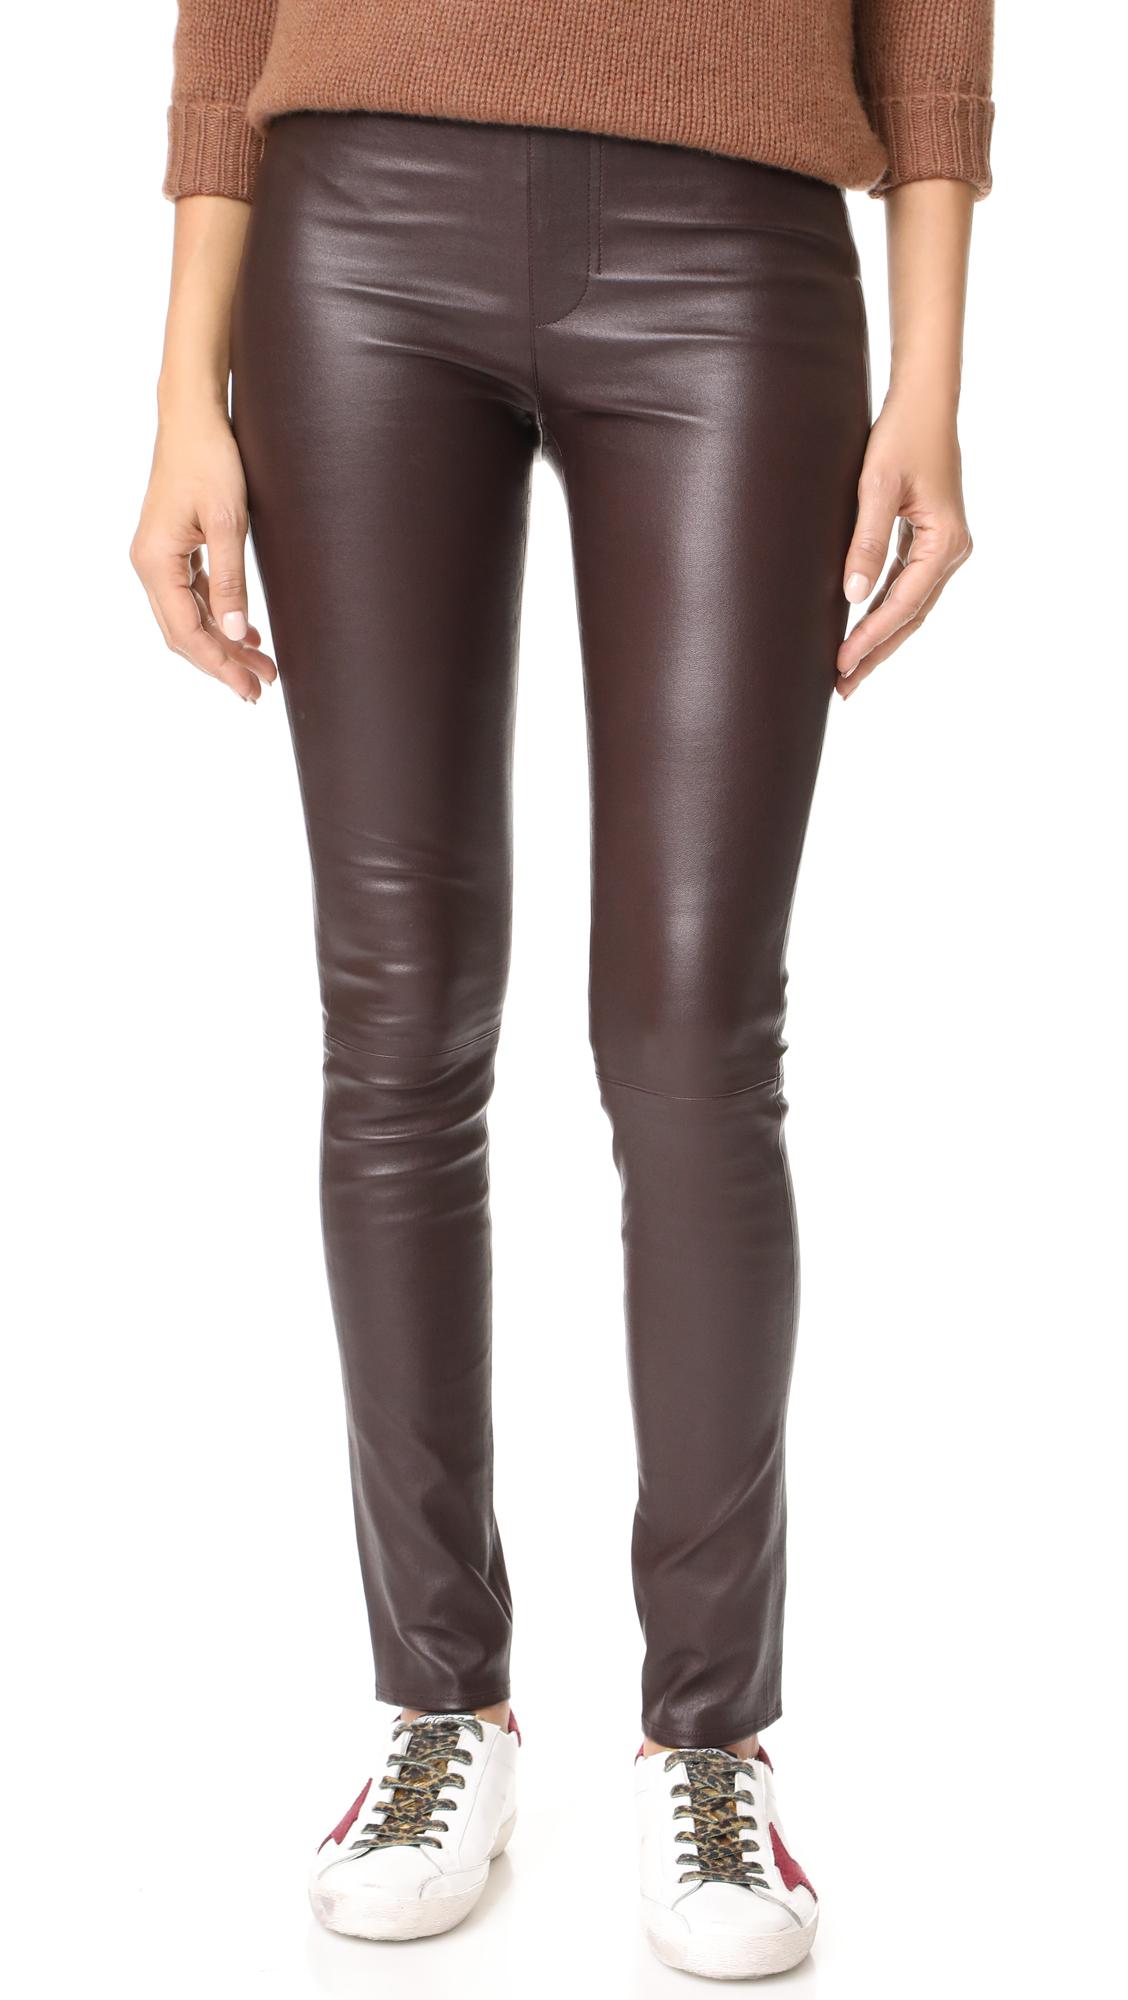 Leather Leggings Outfit  International Society of Precision